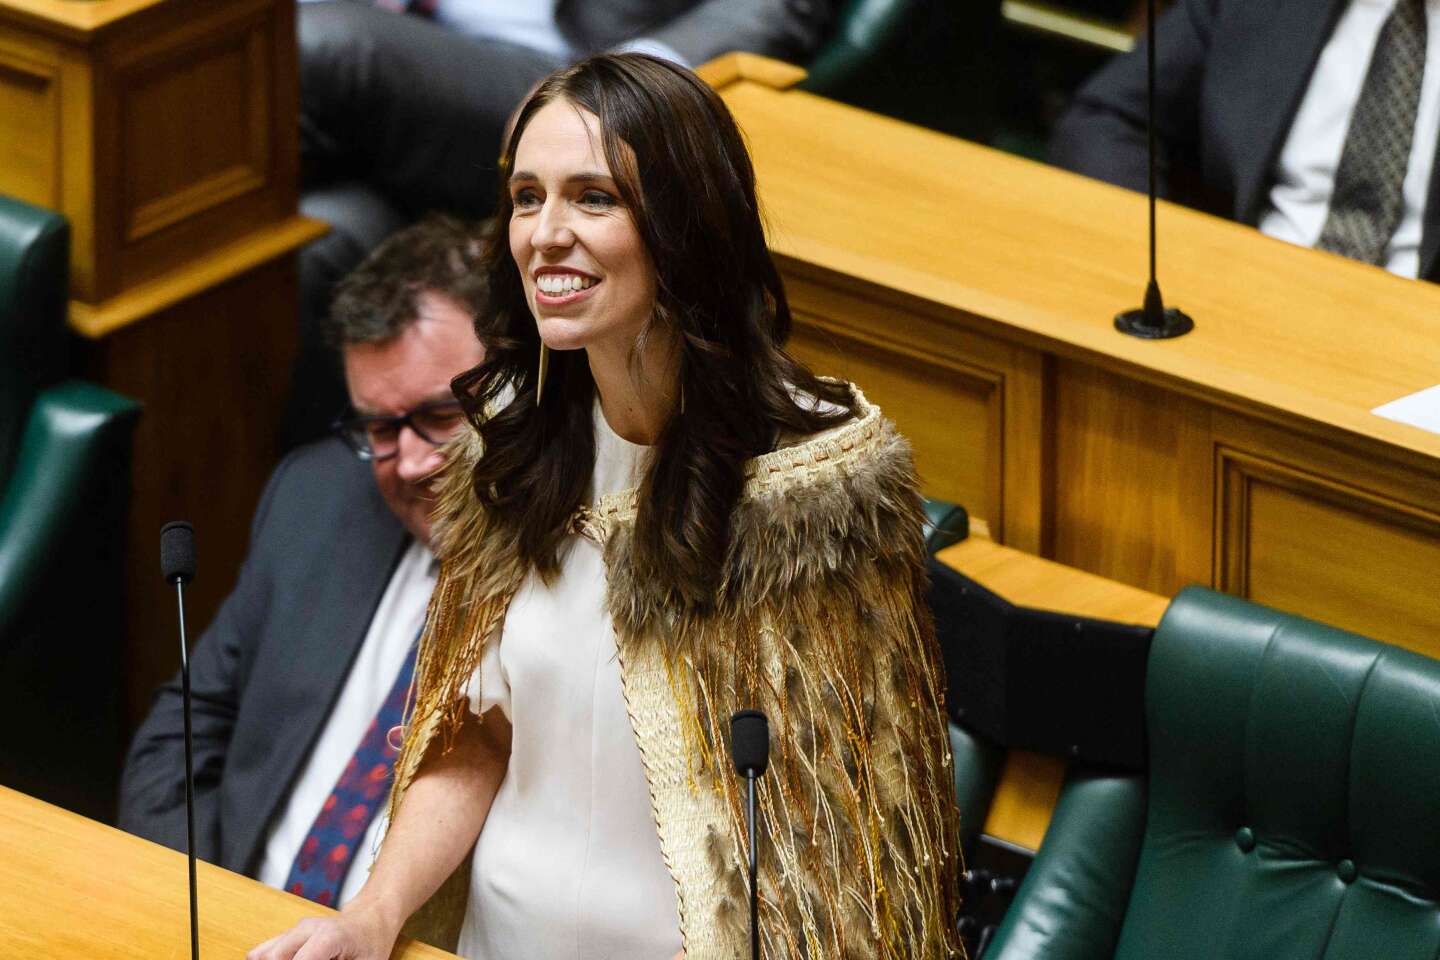 A moving farewell to Jacinda Ardern, former Prime Minister of New Zealand